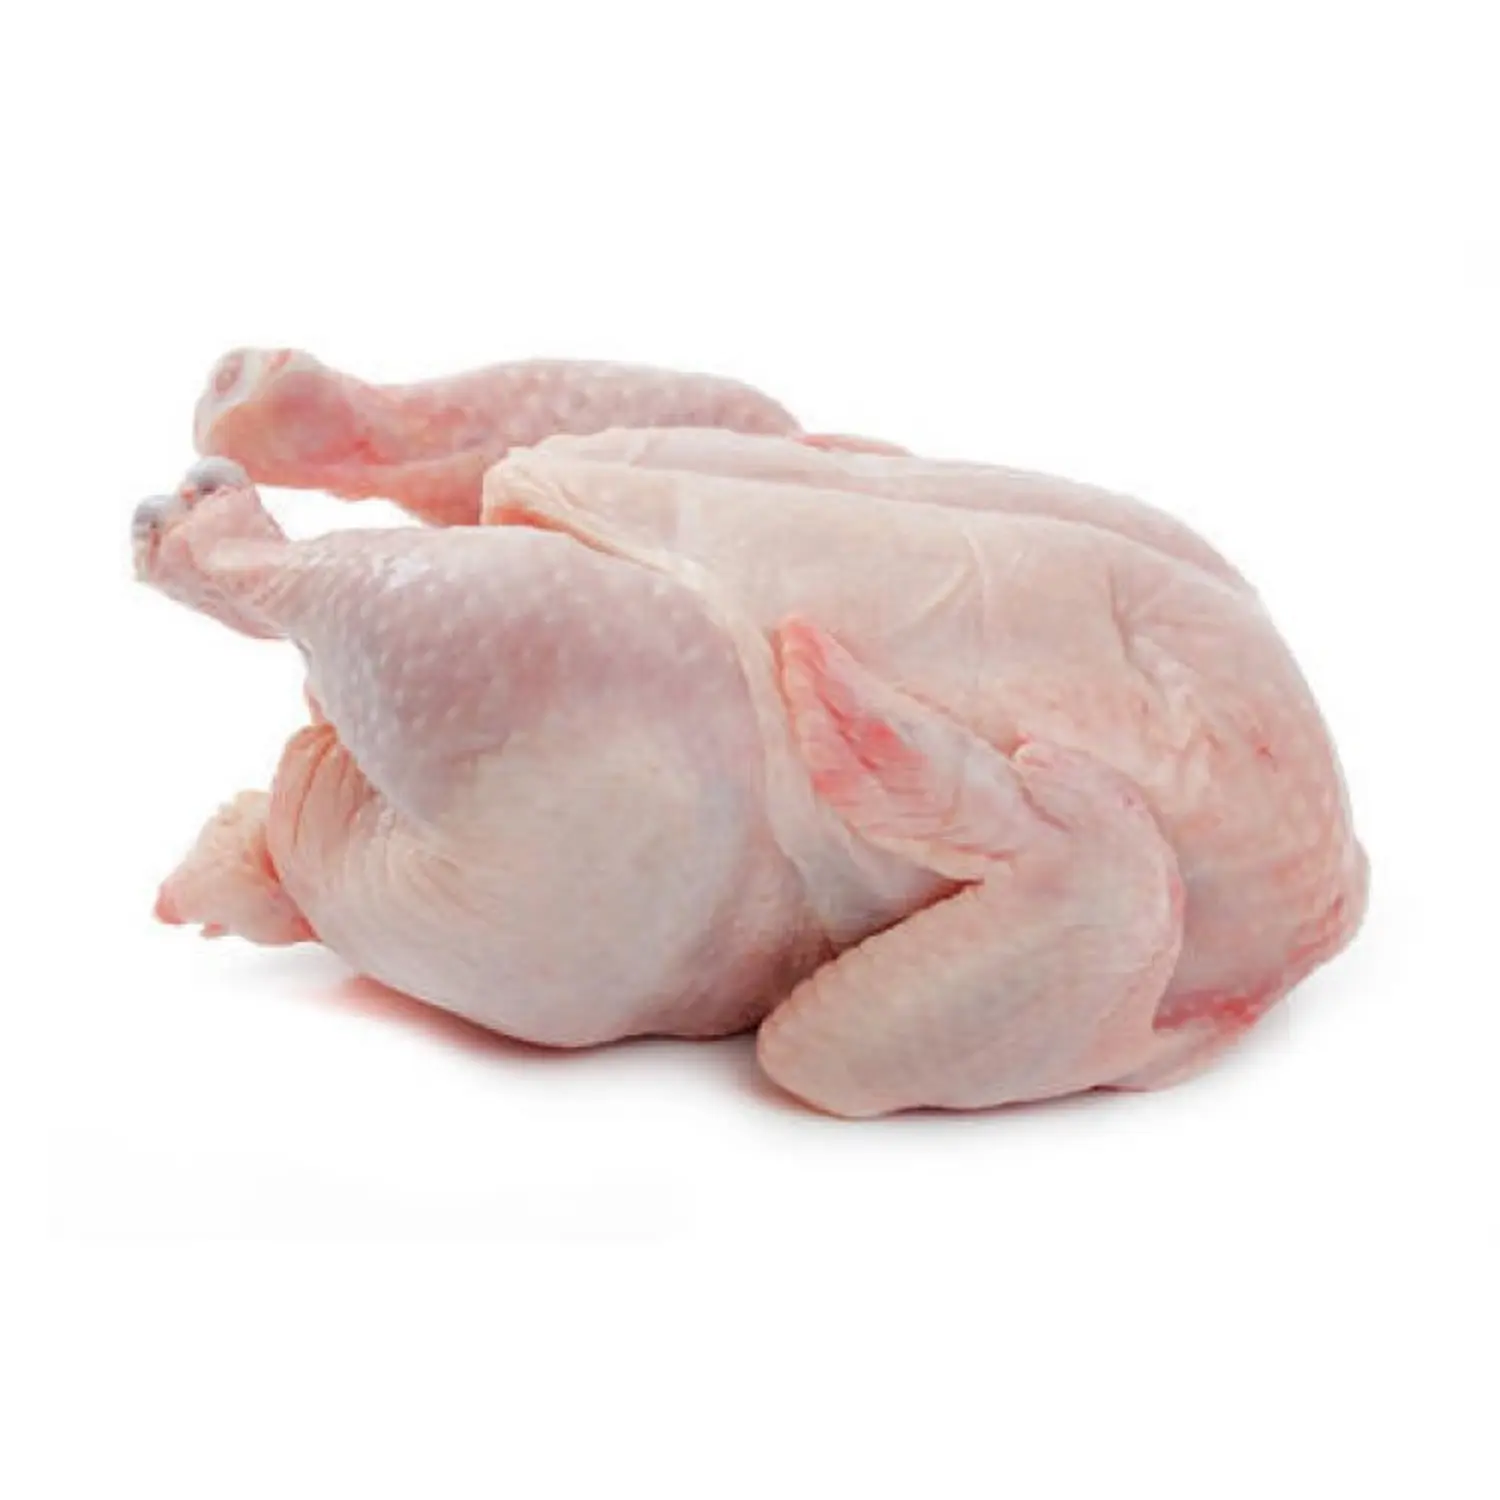 Premium Grade Fresh Frozen Chicken In a Best Rate Wholesale Chickens Frozen Poultry Meat Whole Chicken Halal Whole Frozen Chick